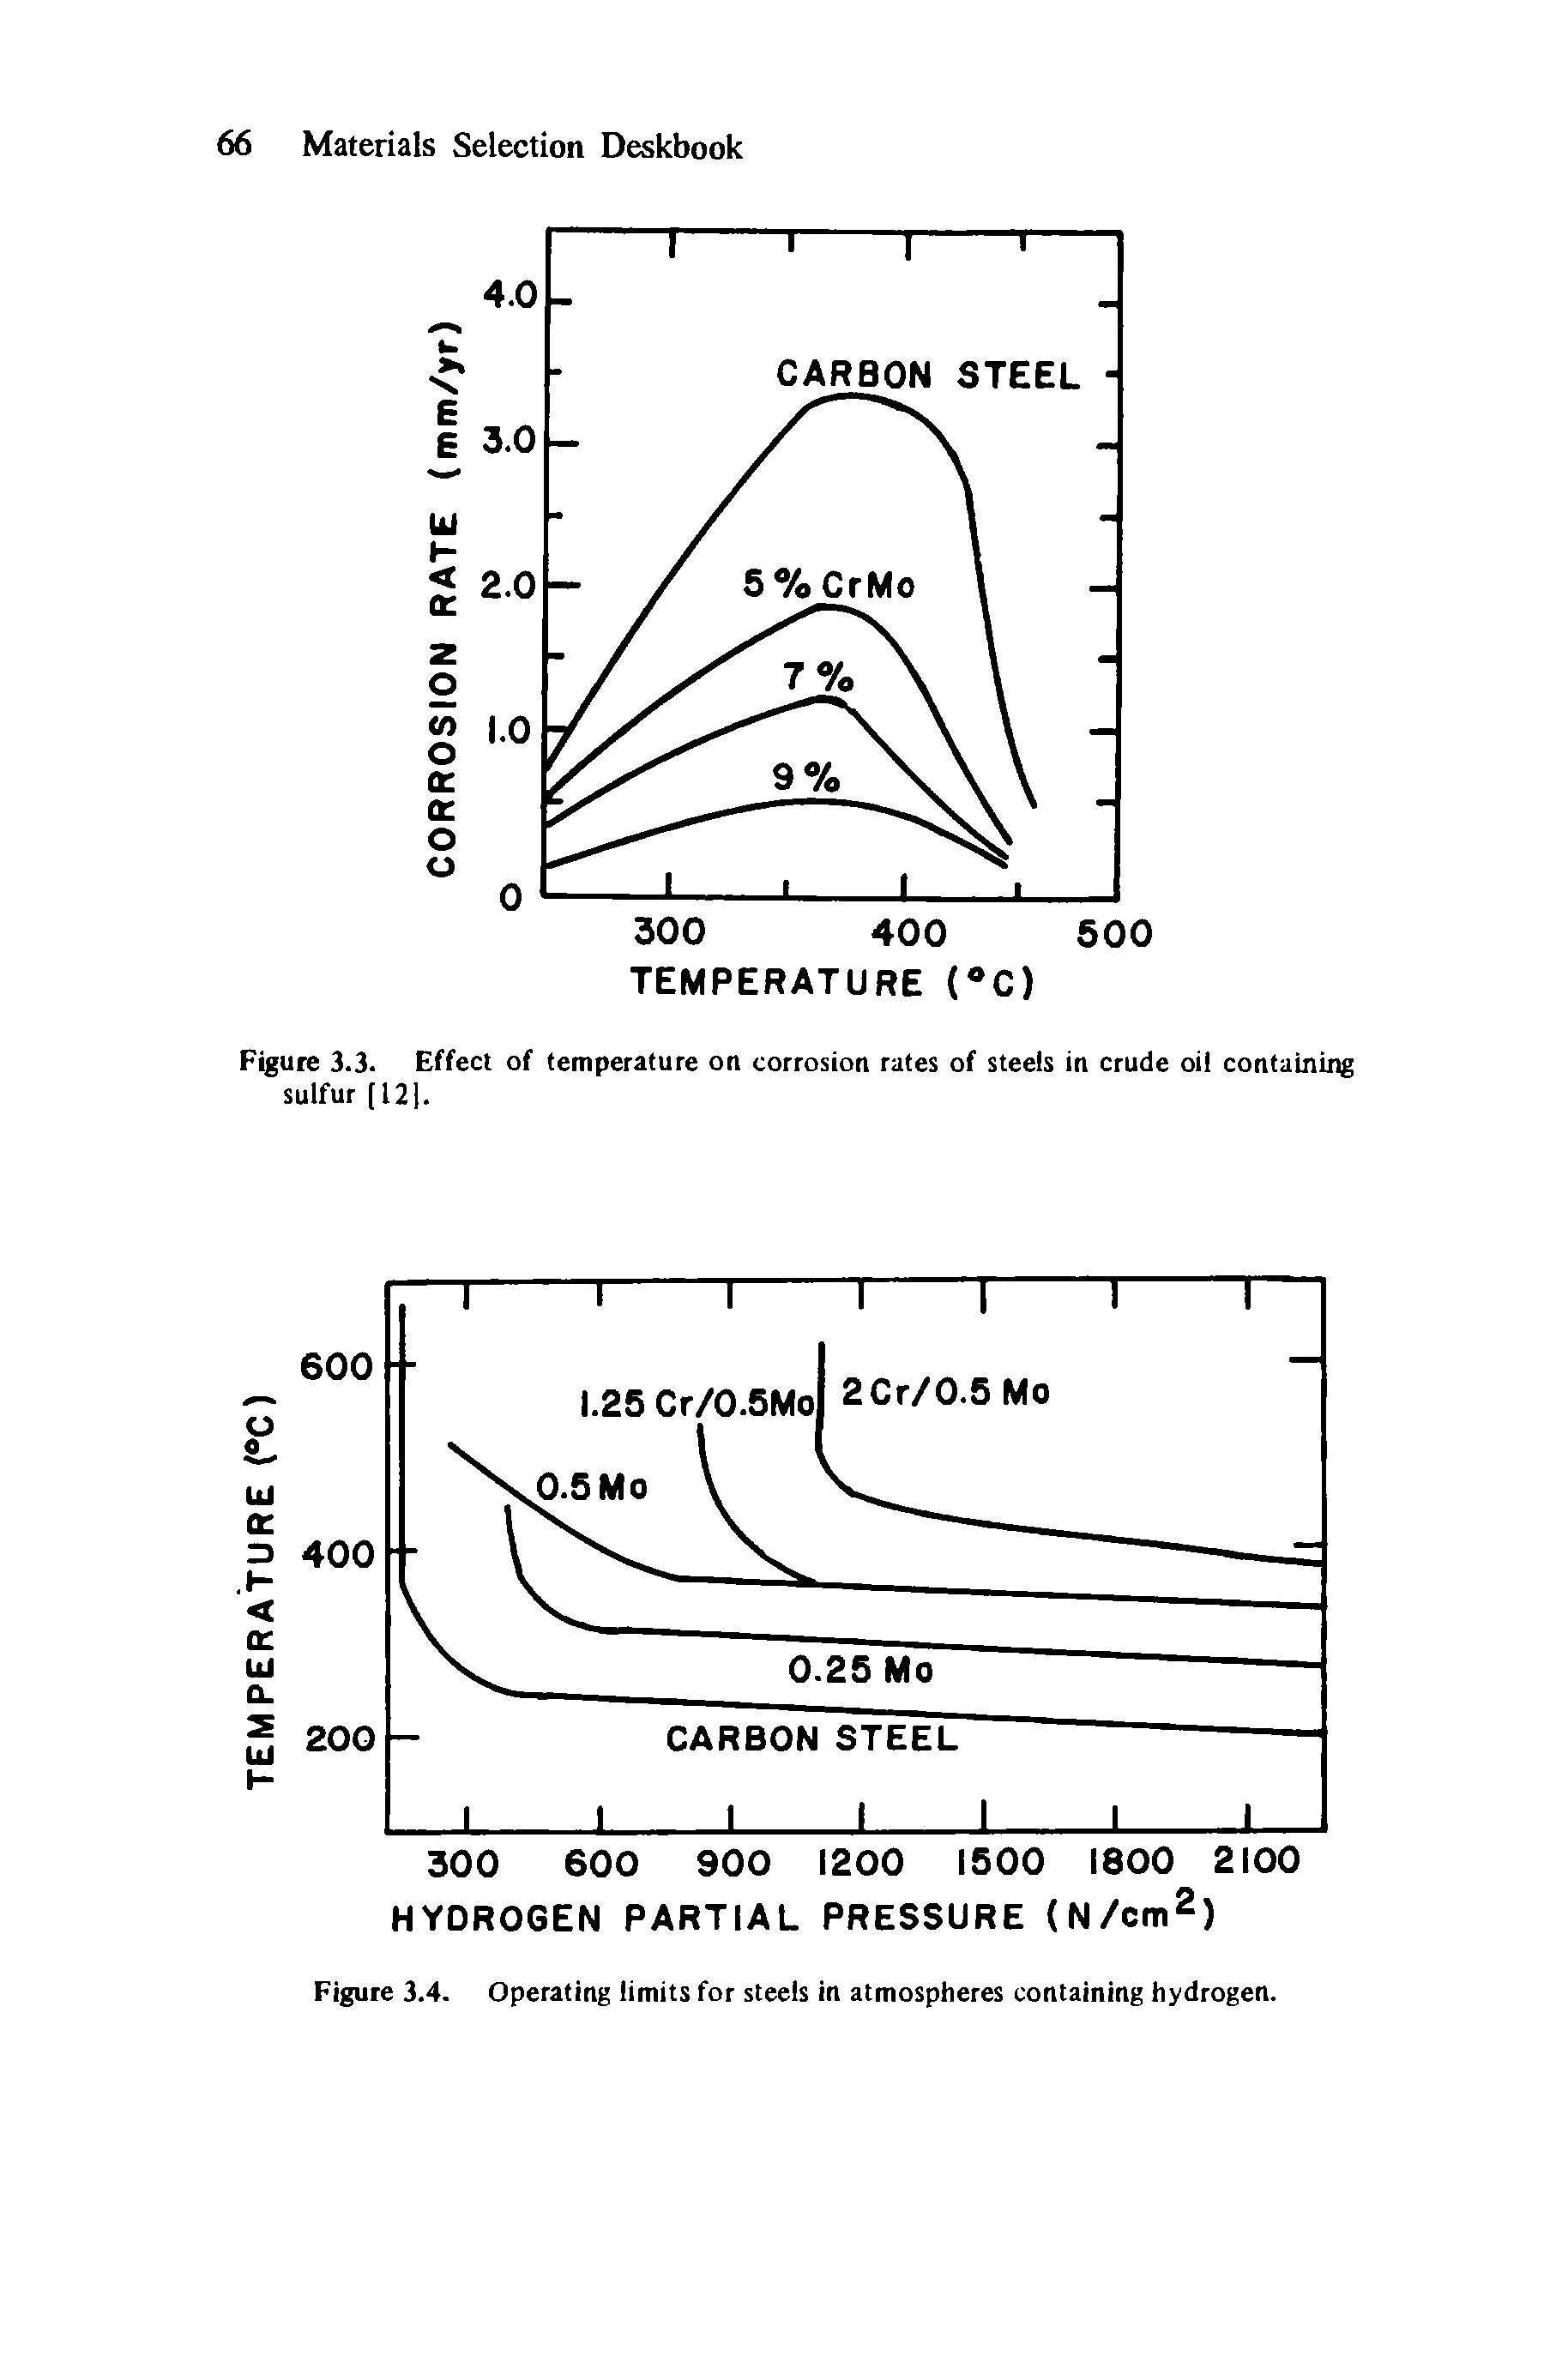 Figure 3.4. Operating limits for steels in atmospheres containing hydrogen.